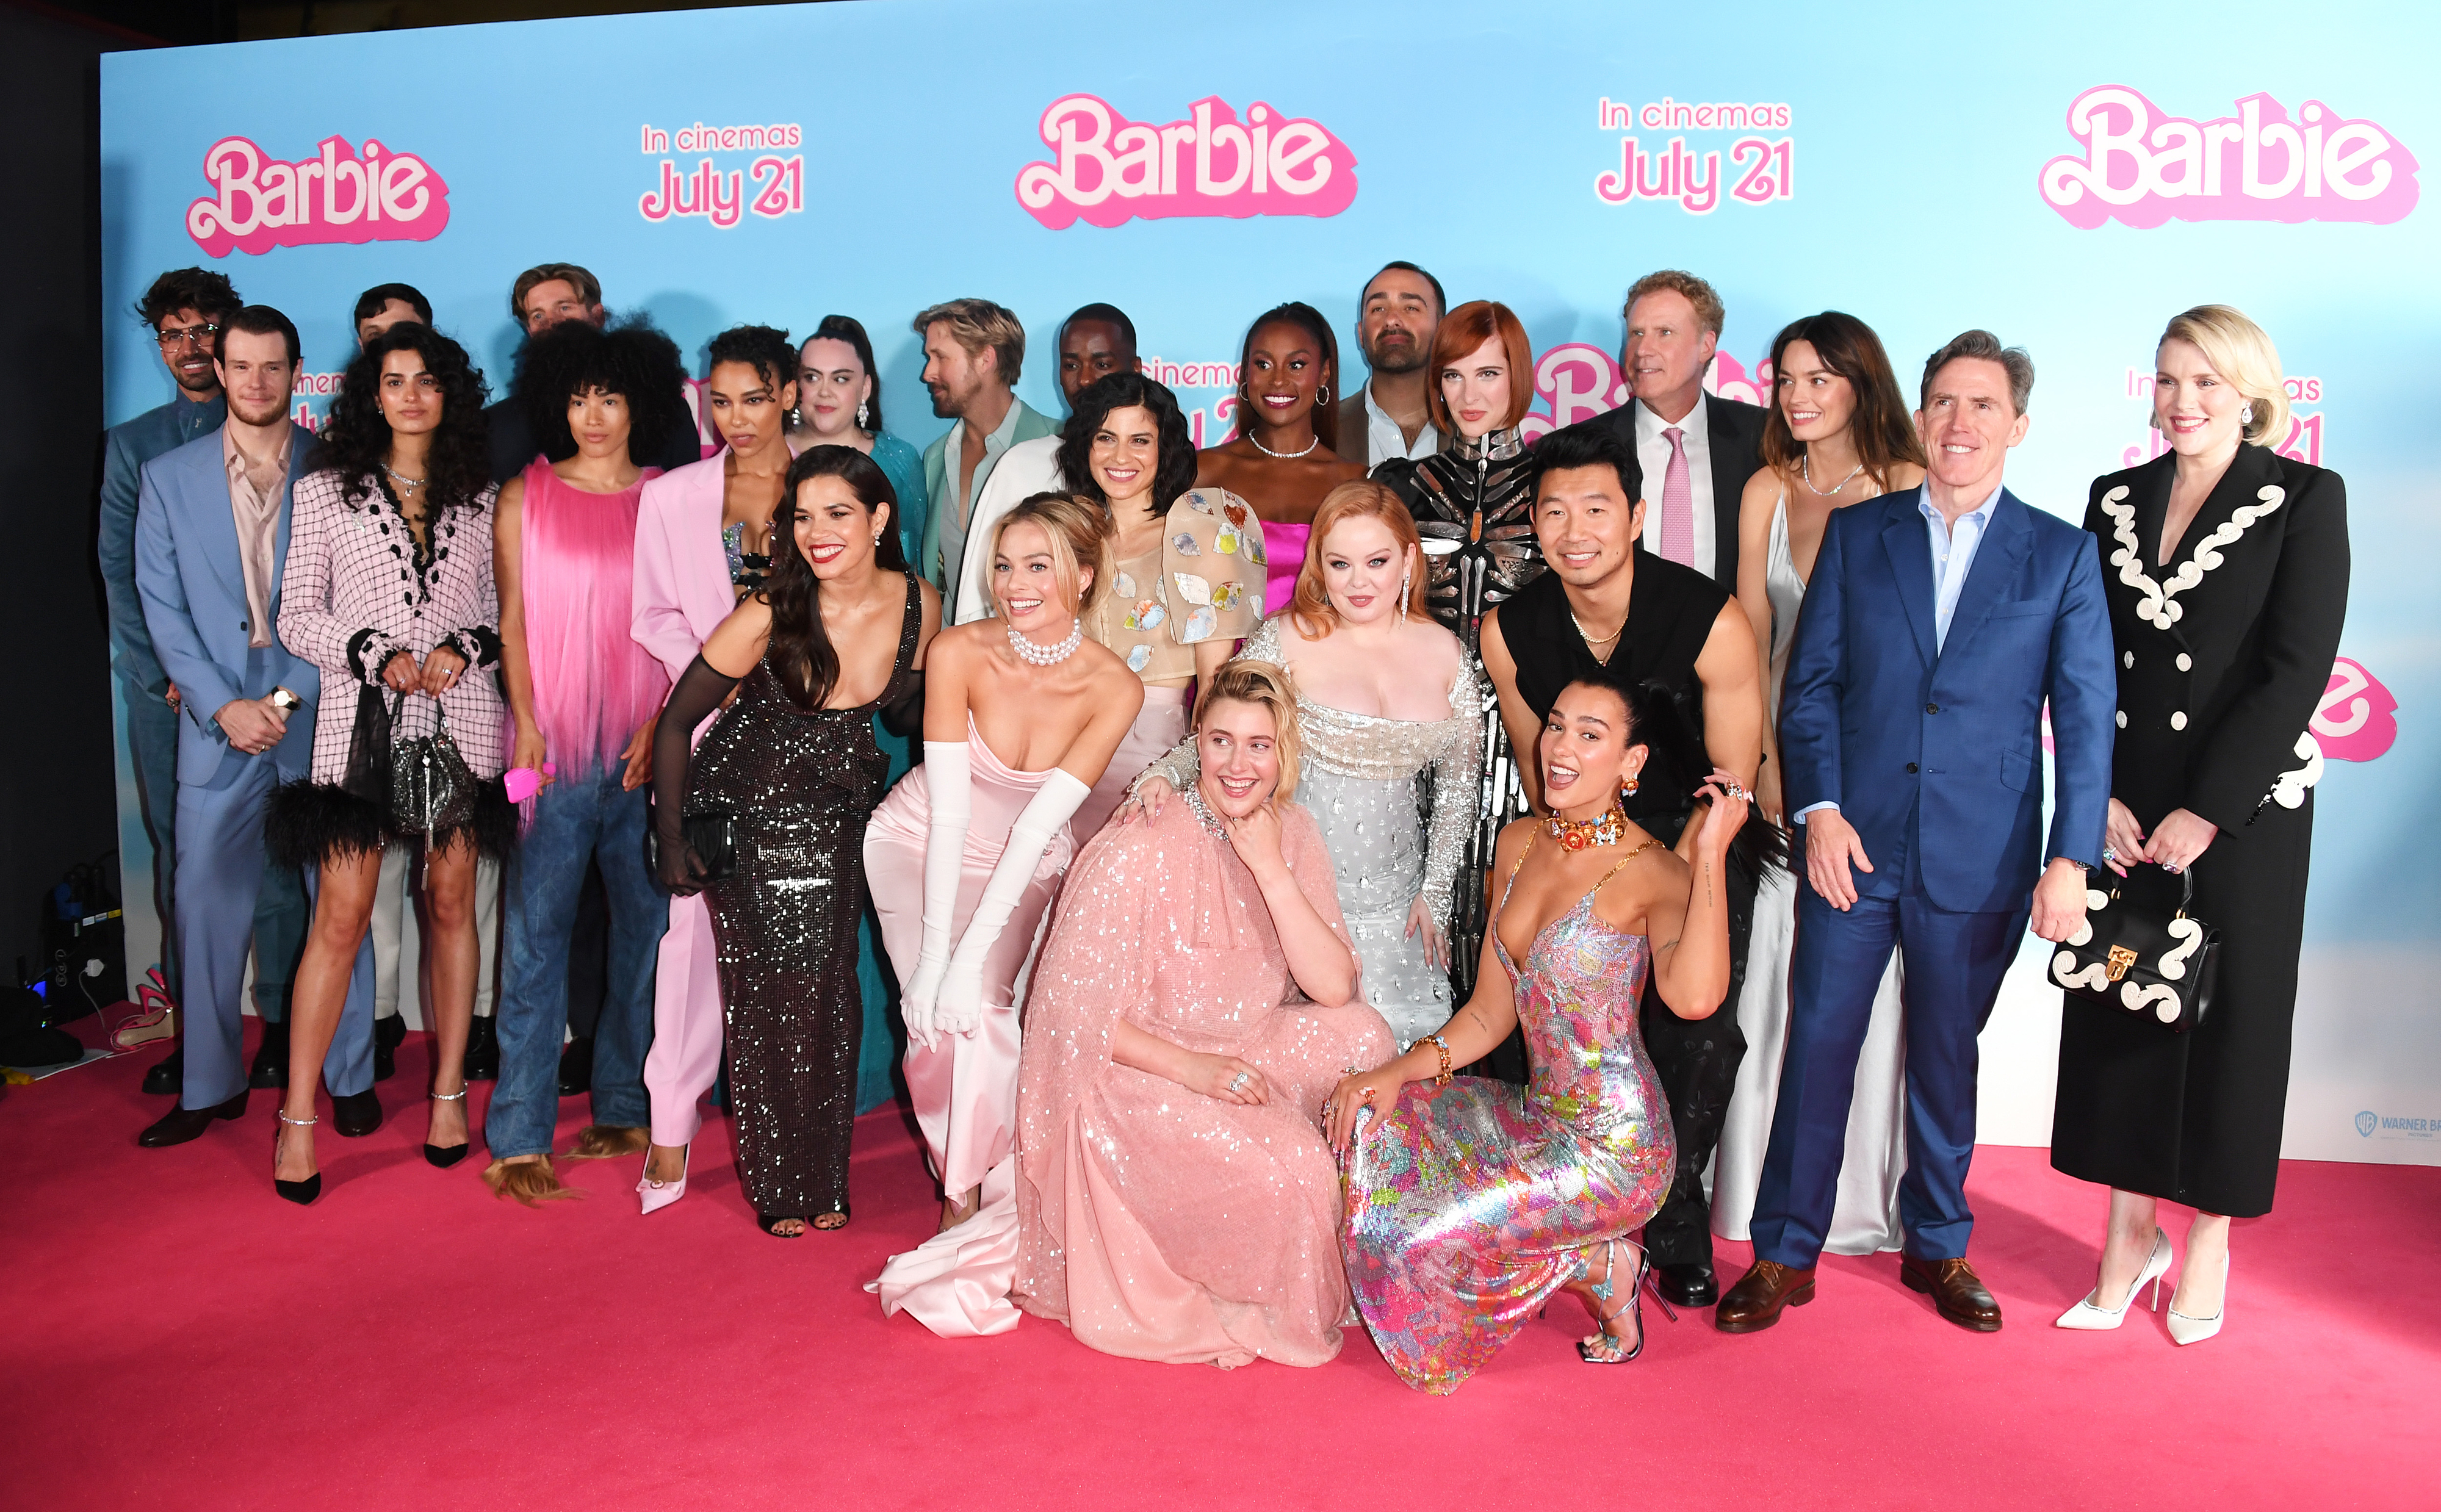 The cast taking a group photo at the premiere